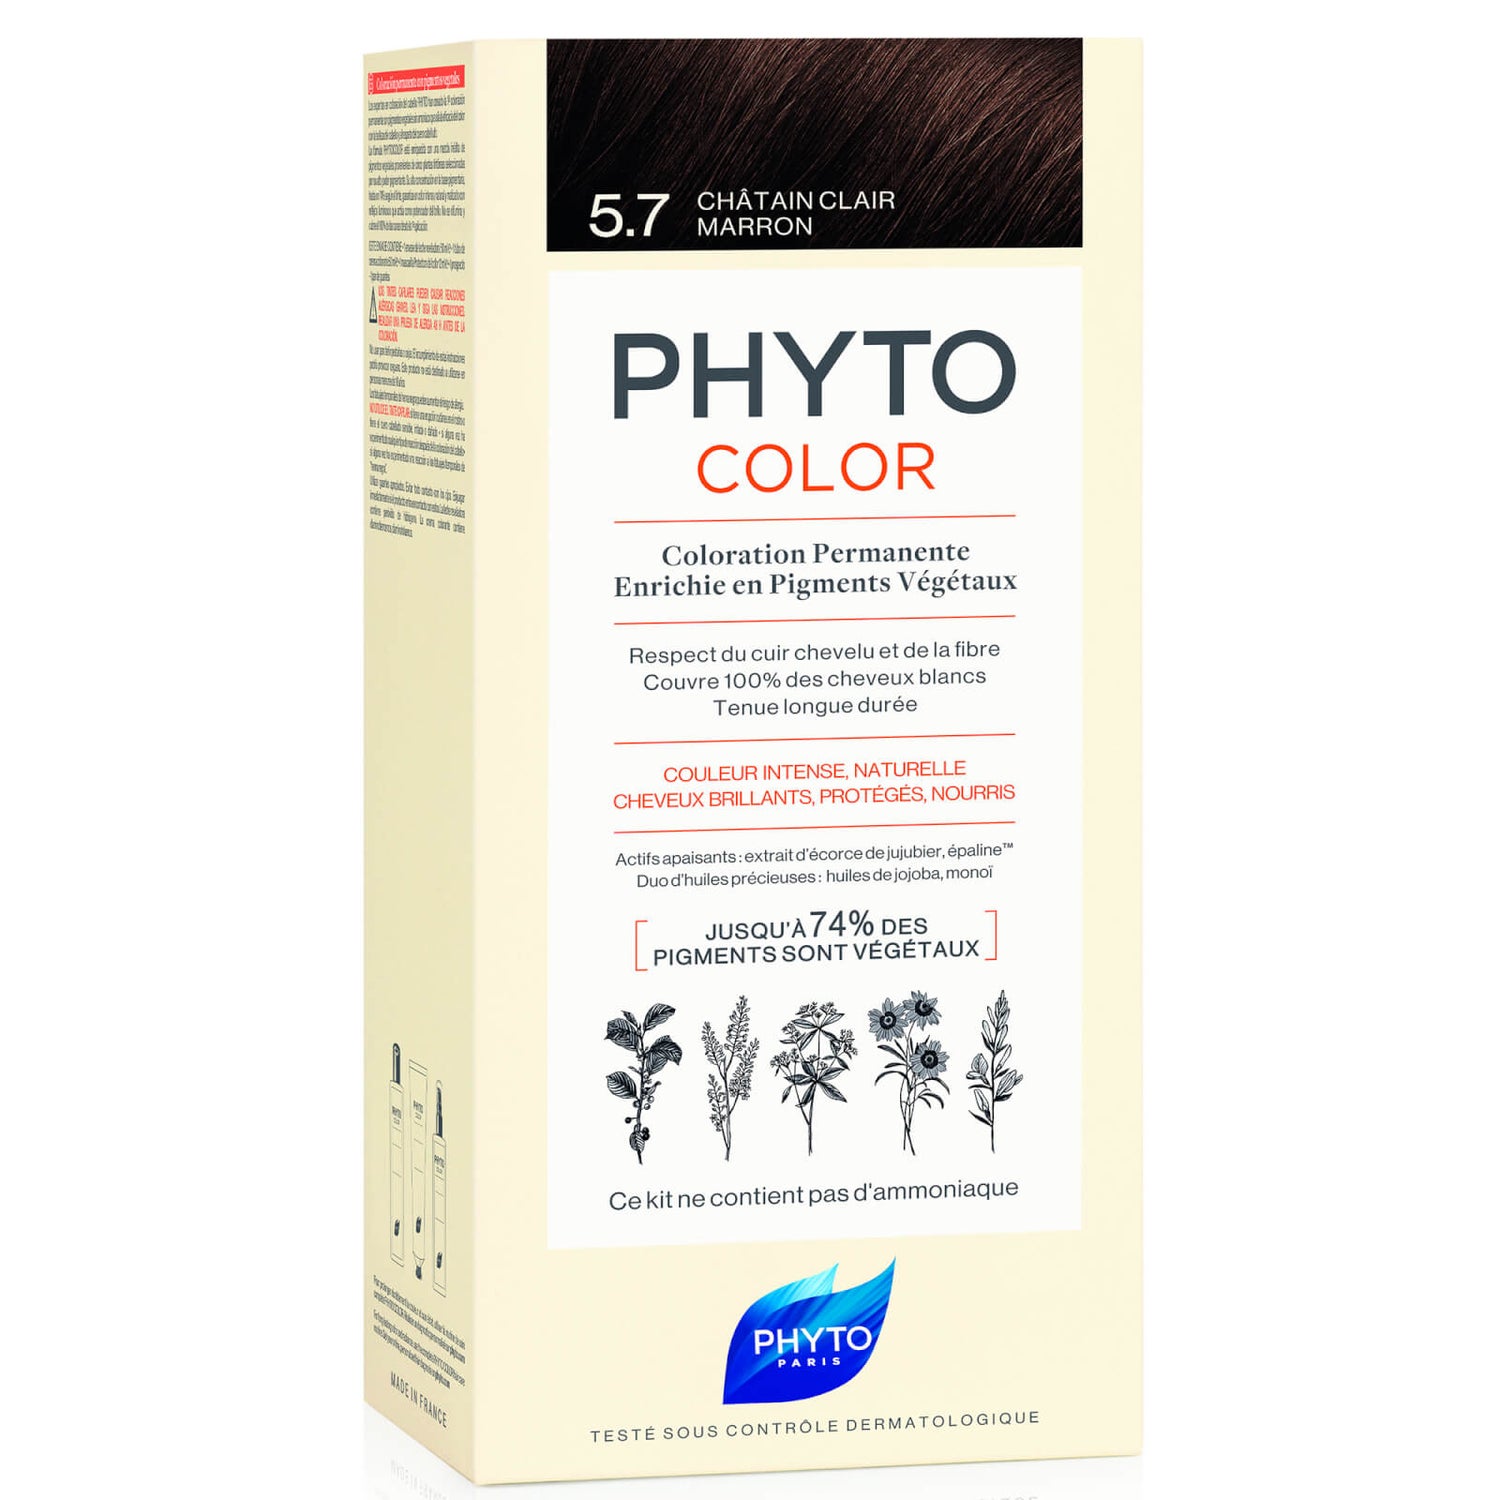 Phyto Hair Colour by Phytocolor - 6 Dark Blonde 180g